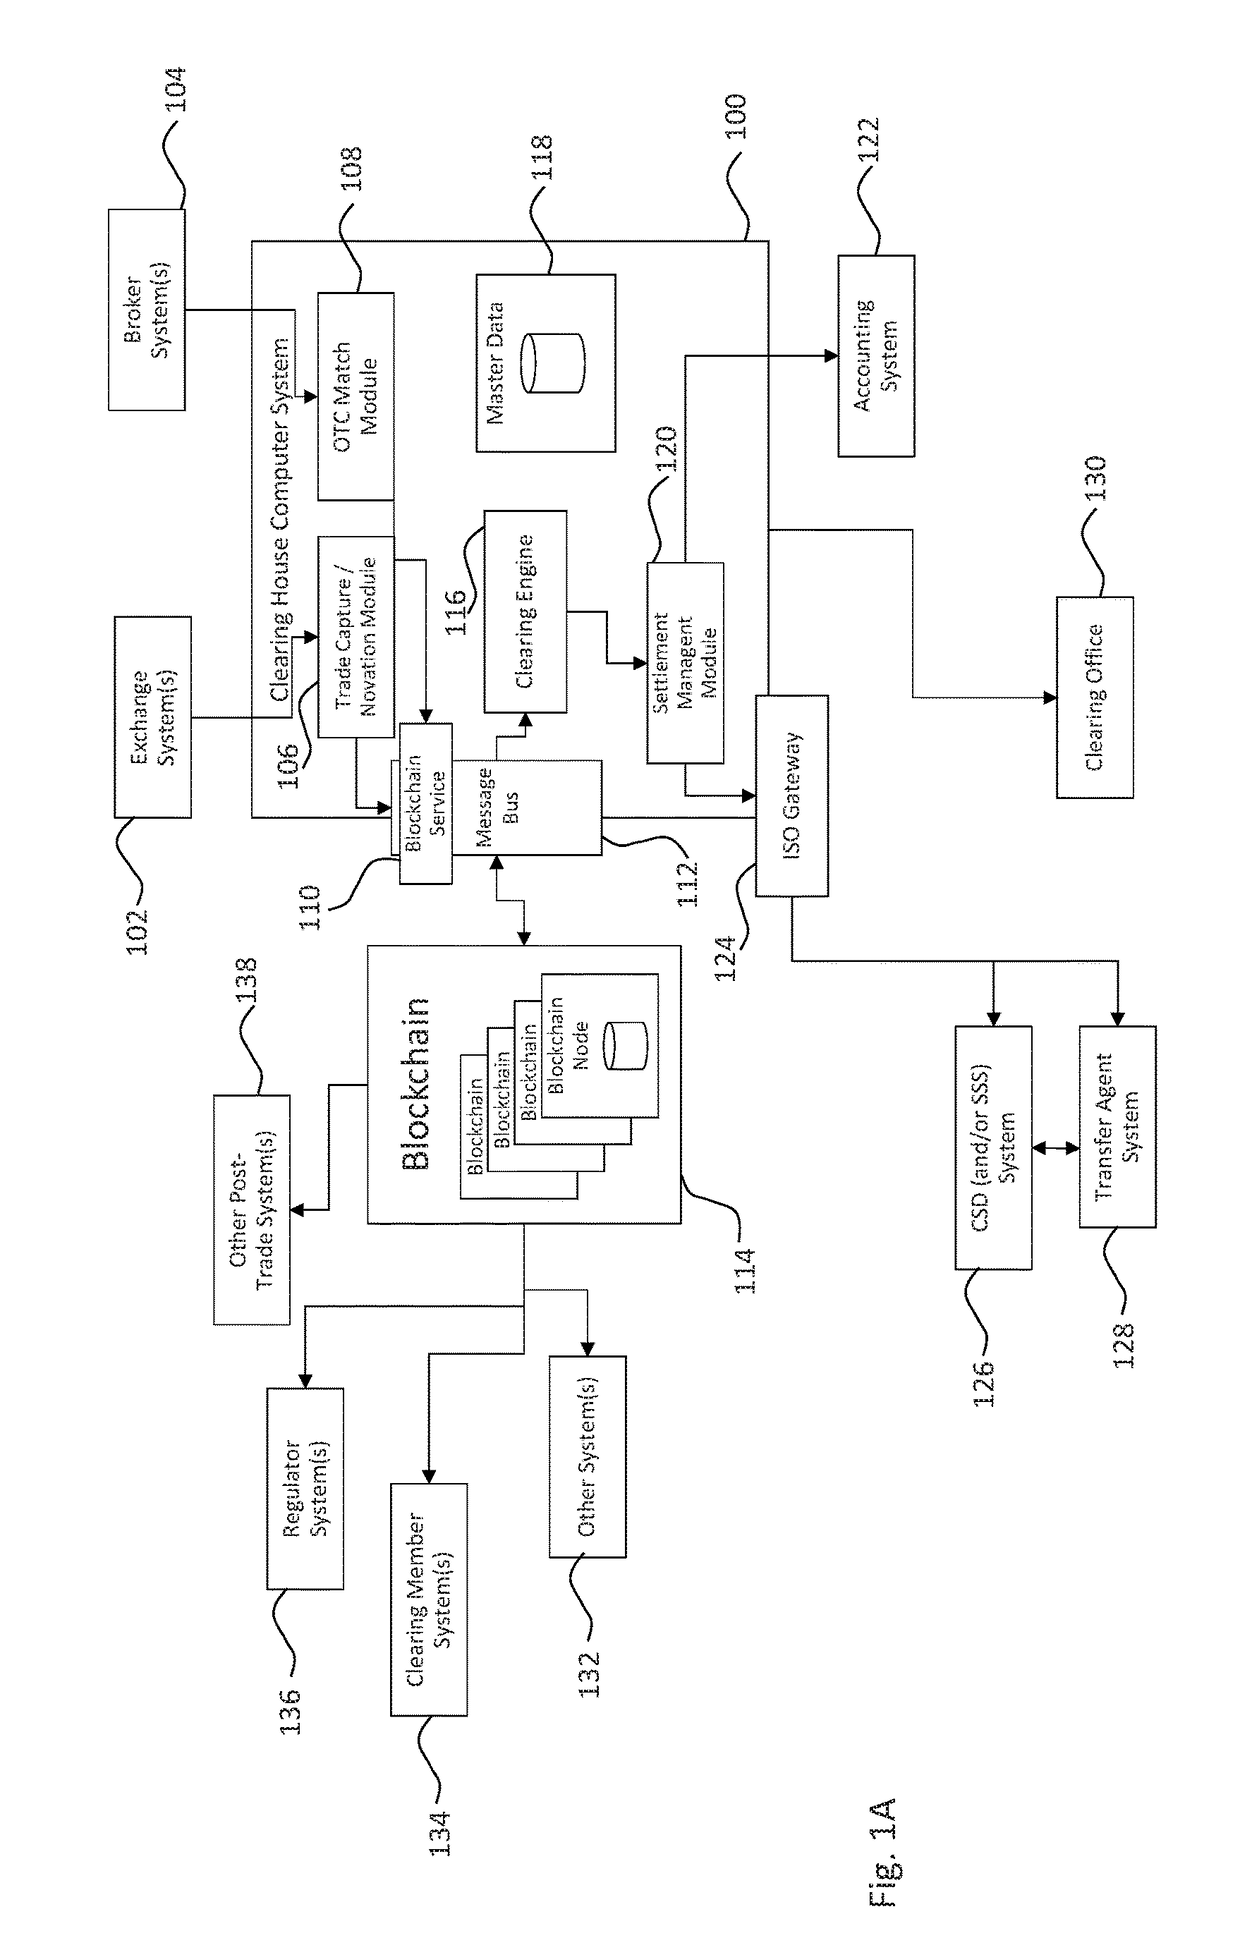 Systems and methods for storing and sharing transactional data using distributed computing systems